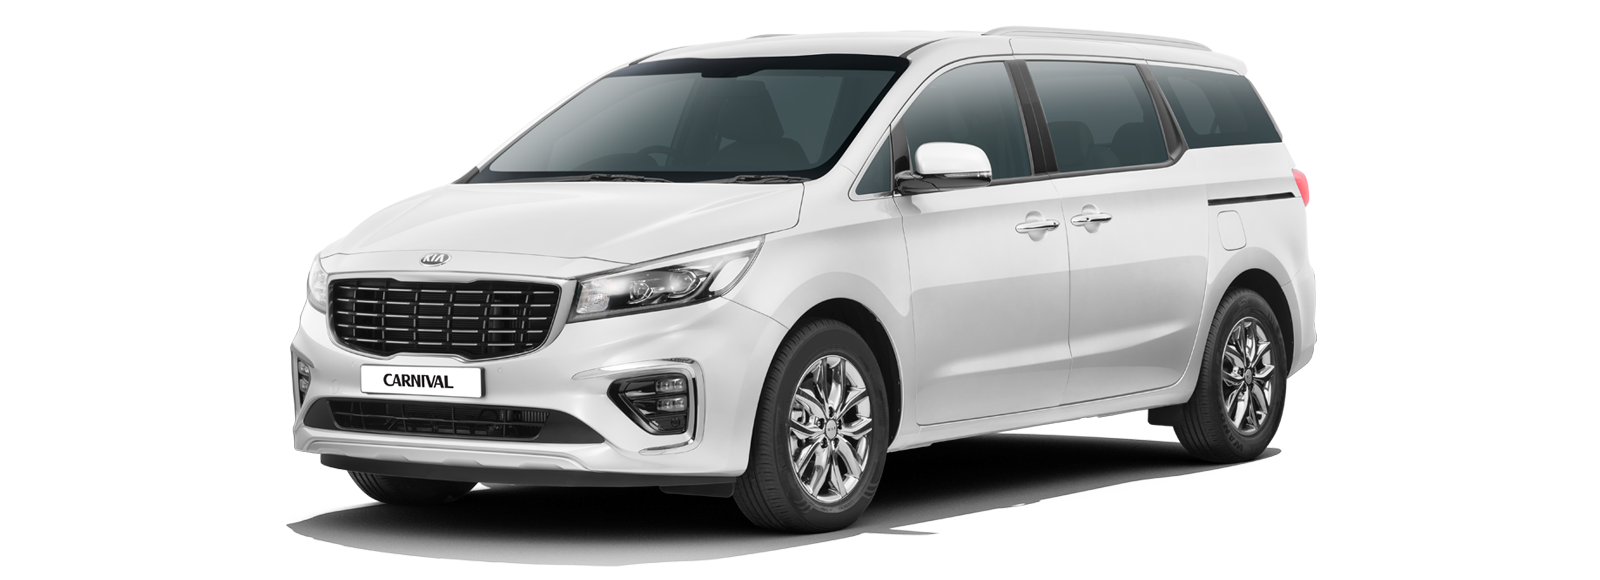 Kia Carnival Color Variants and On Road Price